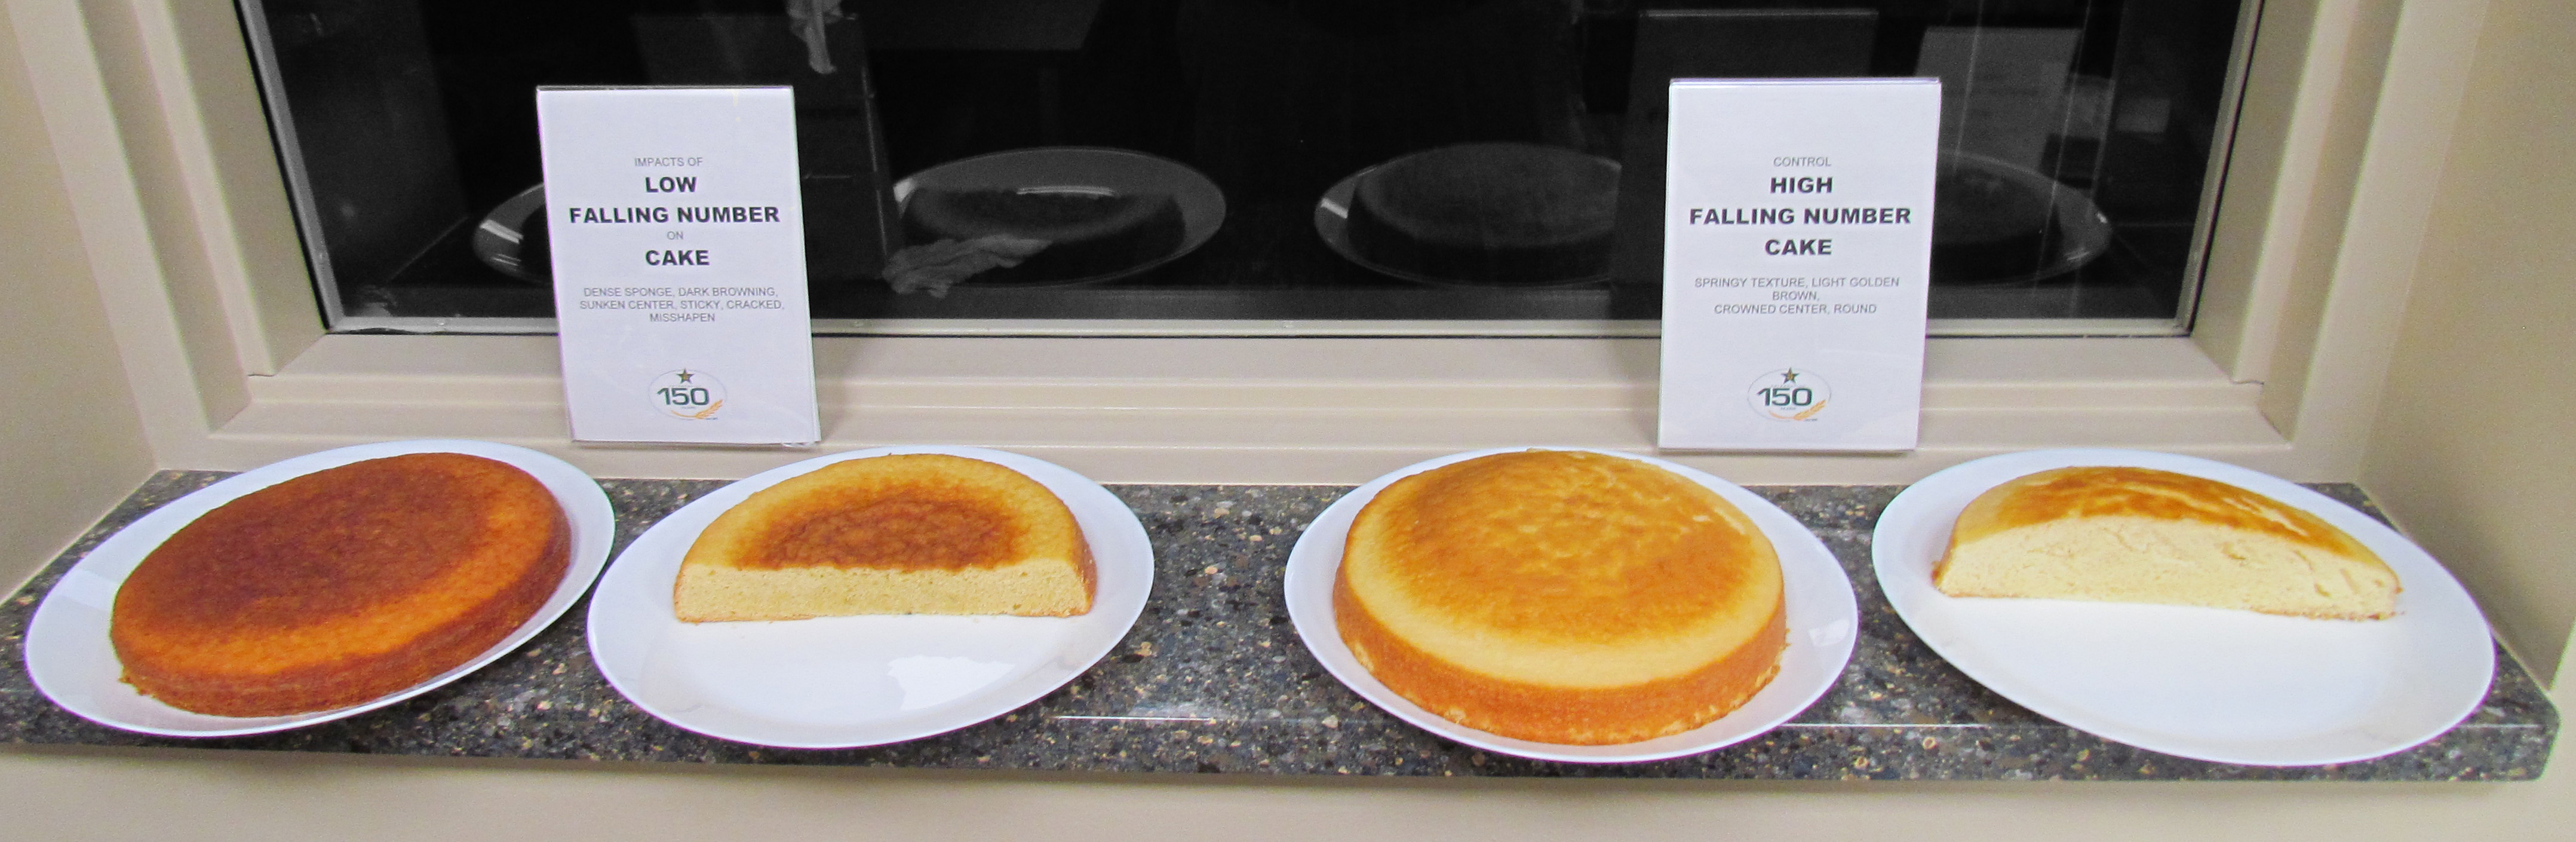 For different cakes on plates, showing examples of what low and high falling numbers look like when baking a cake.